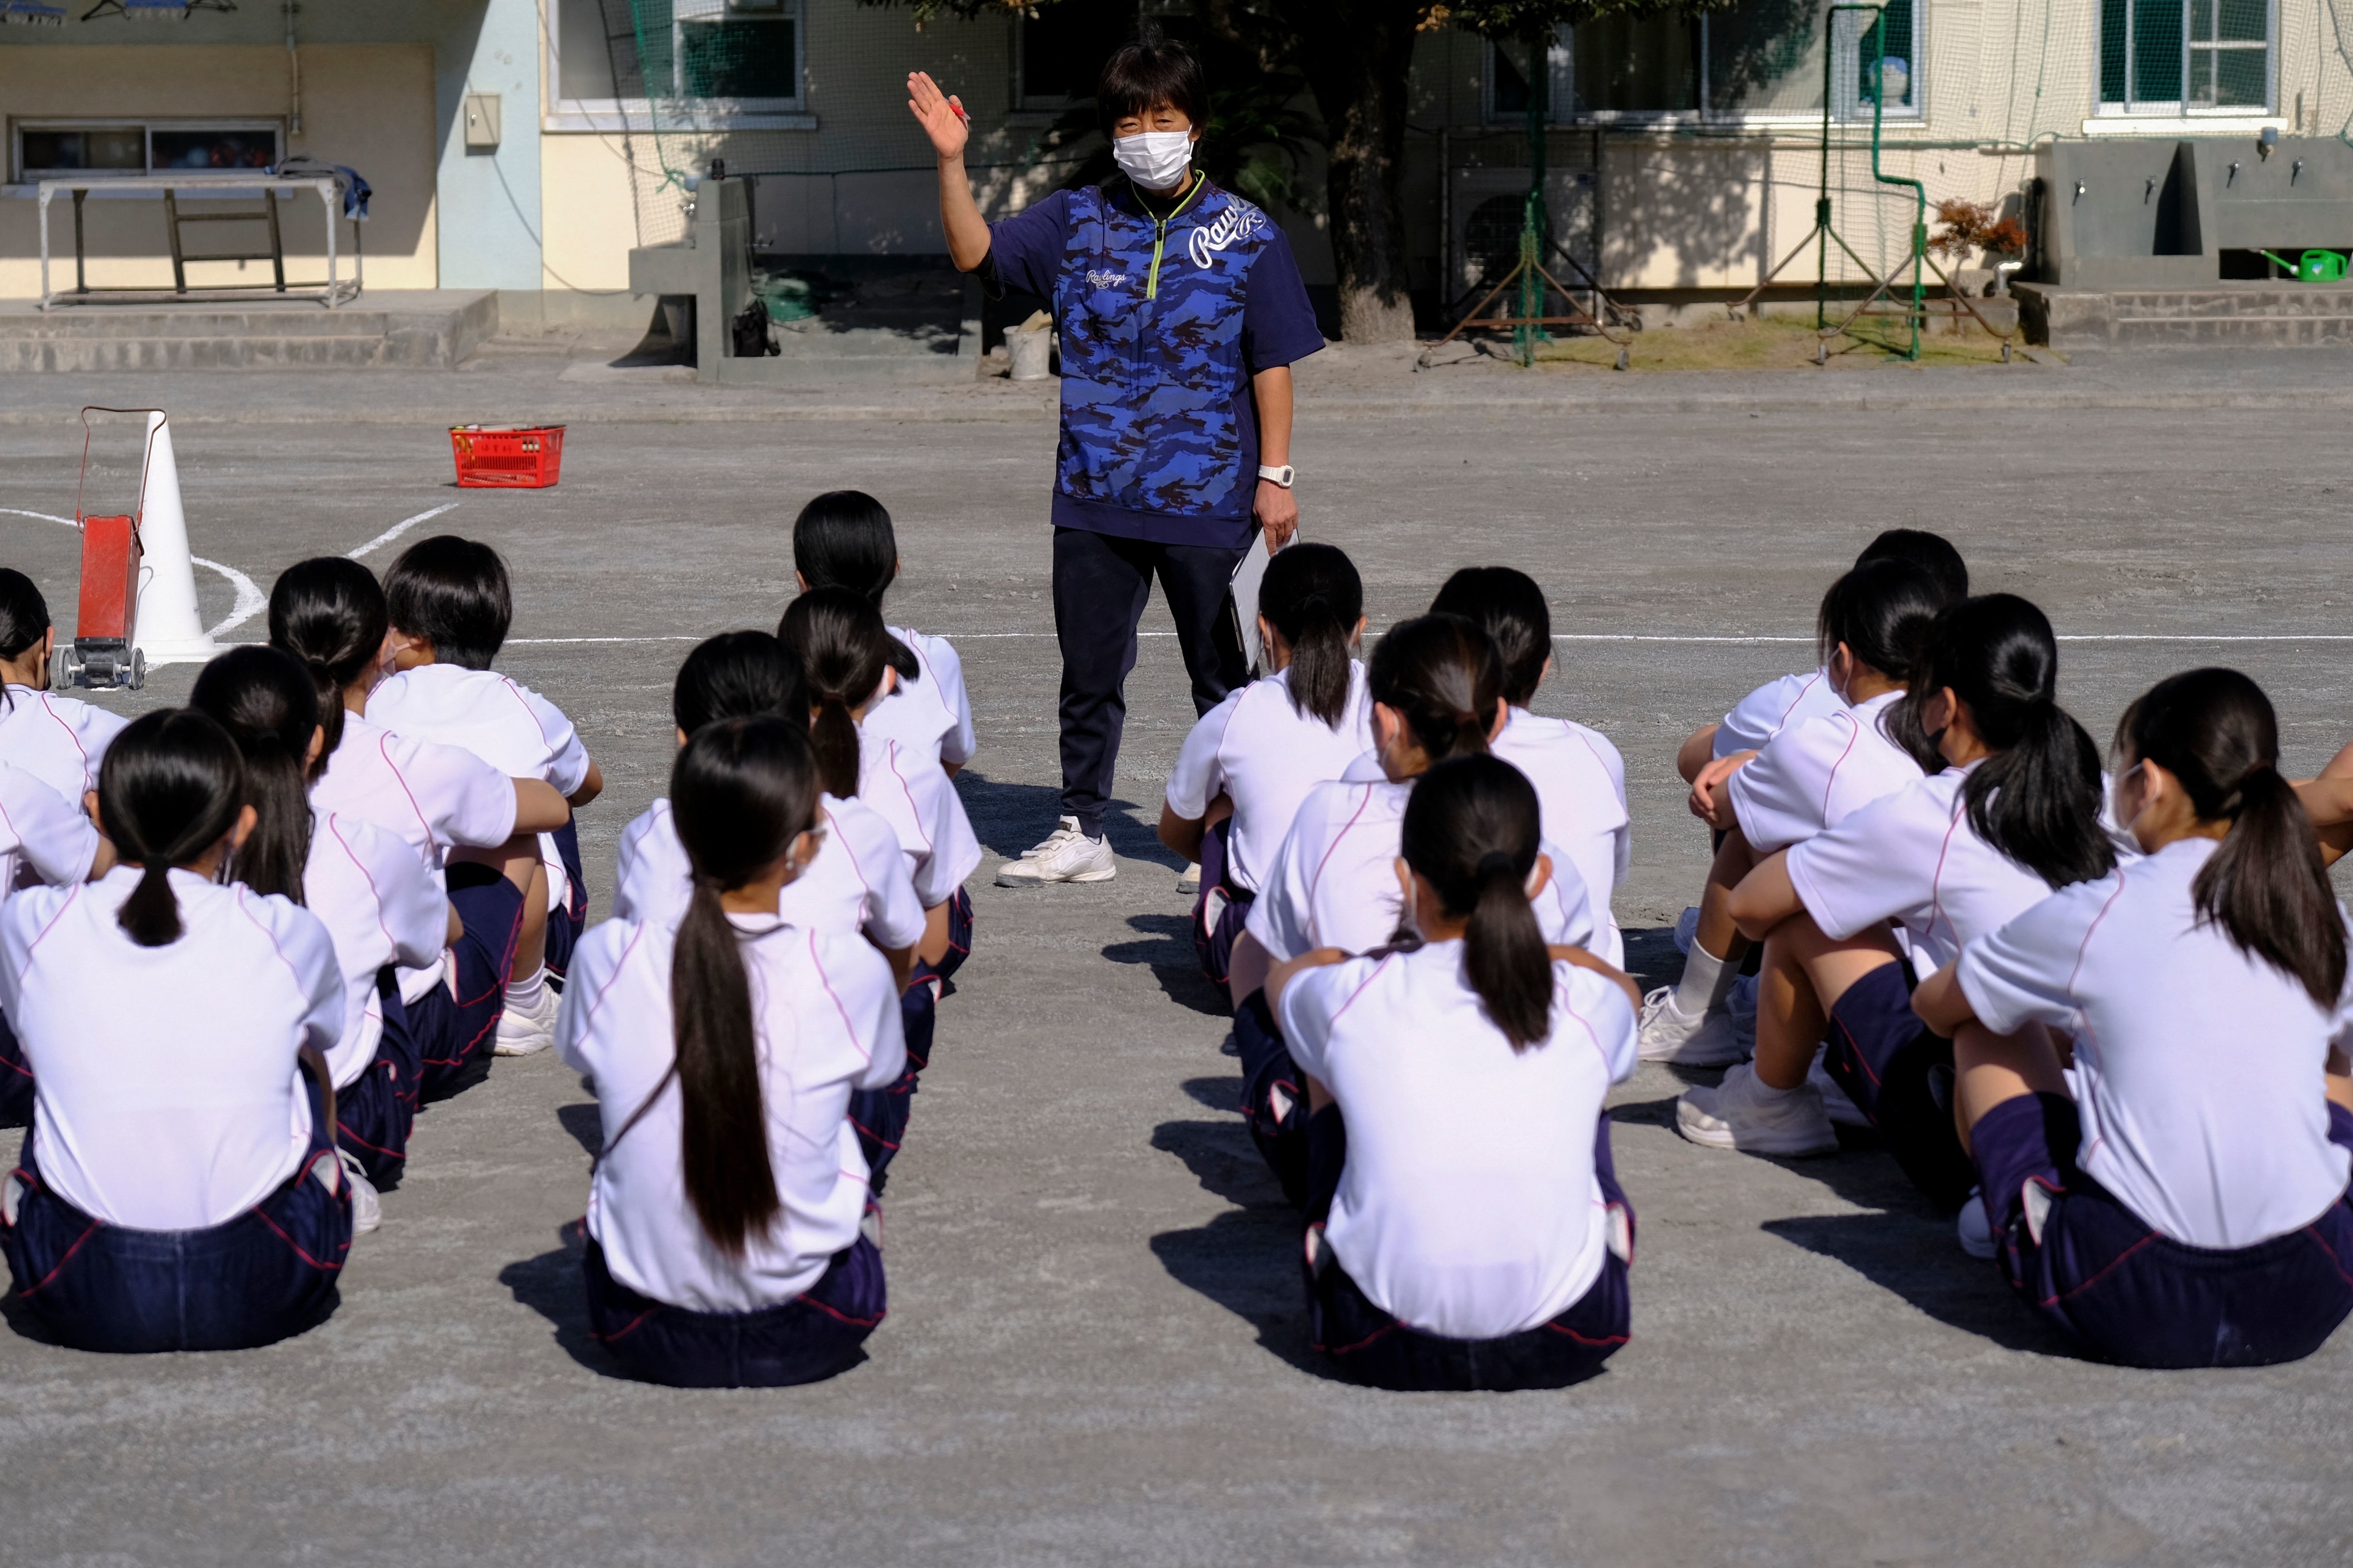 Instructor with face mask standing before seated students in schoolyard, gesturing